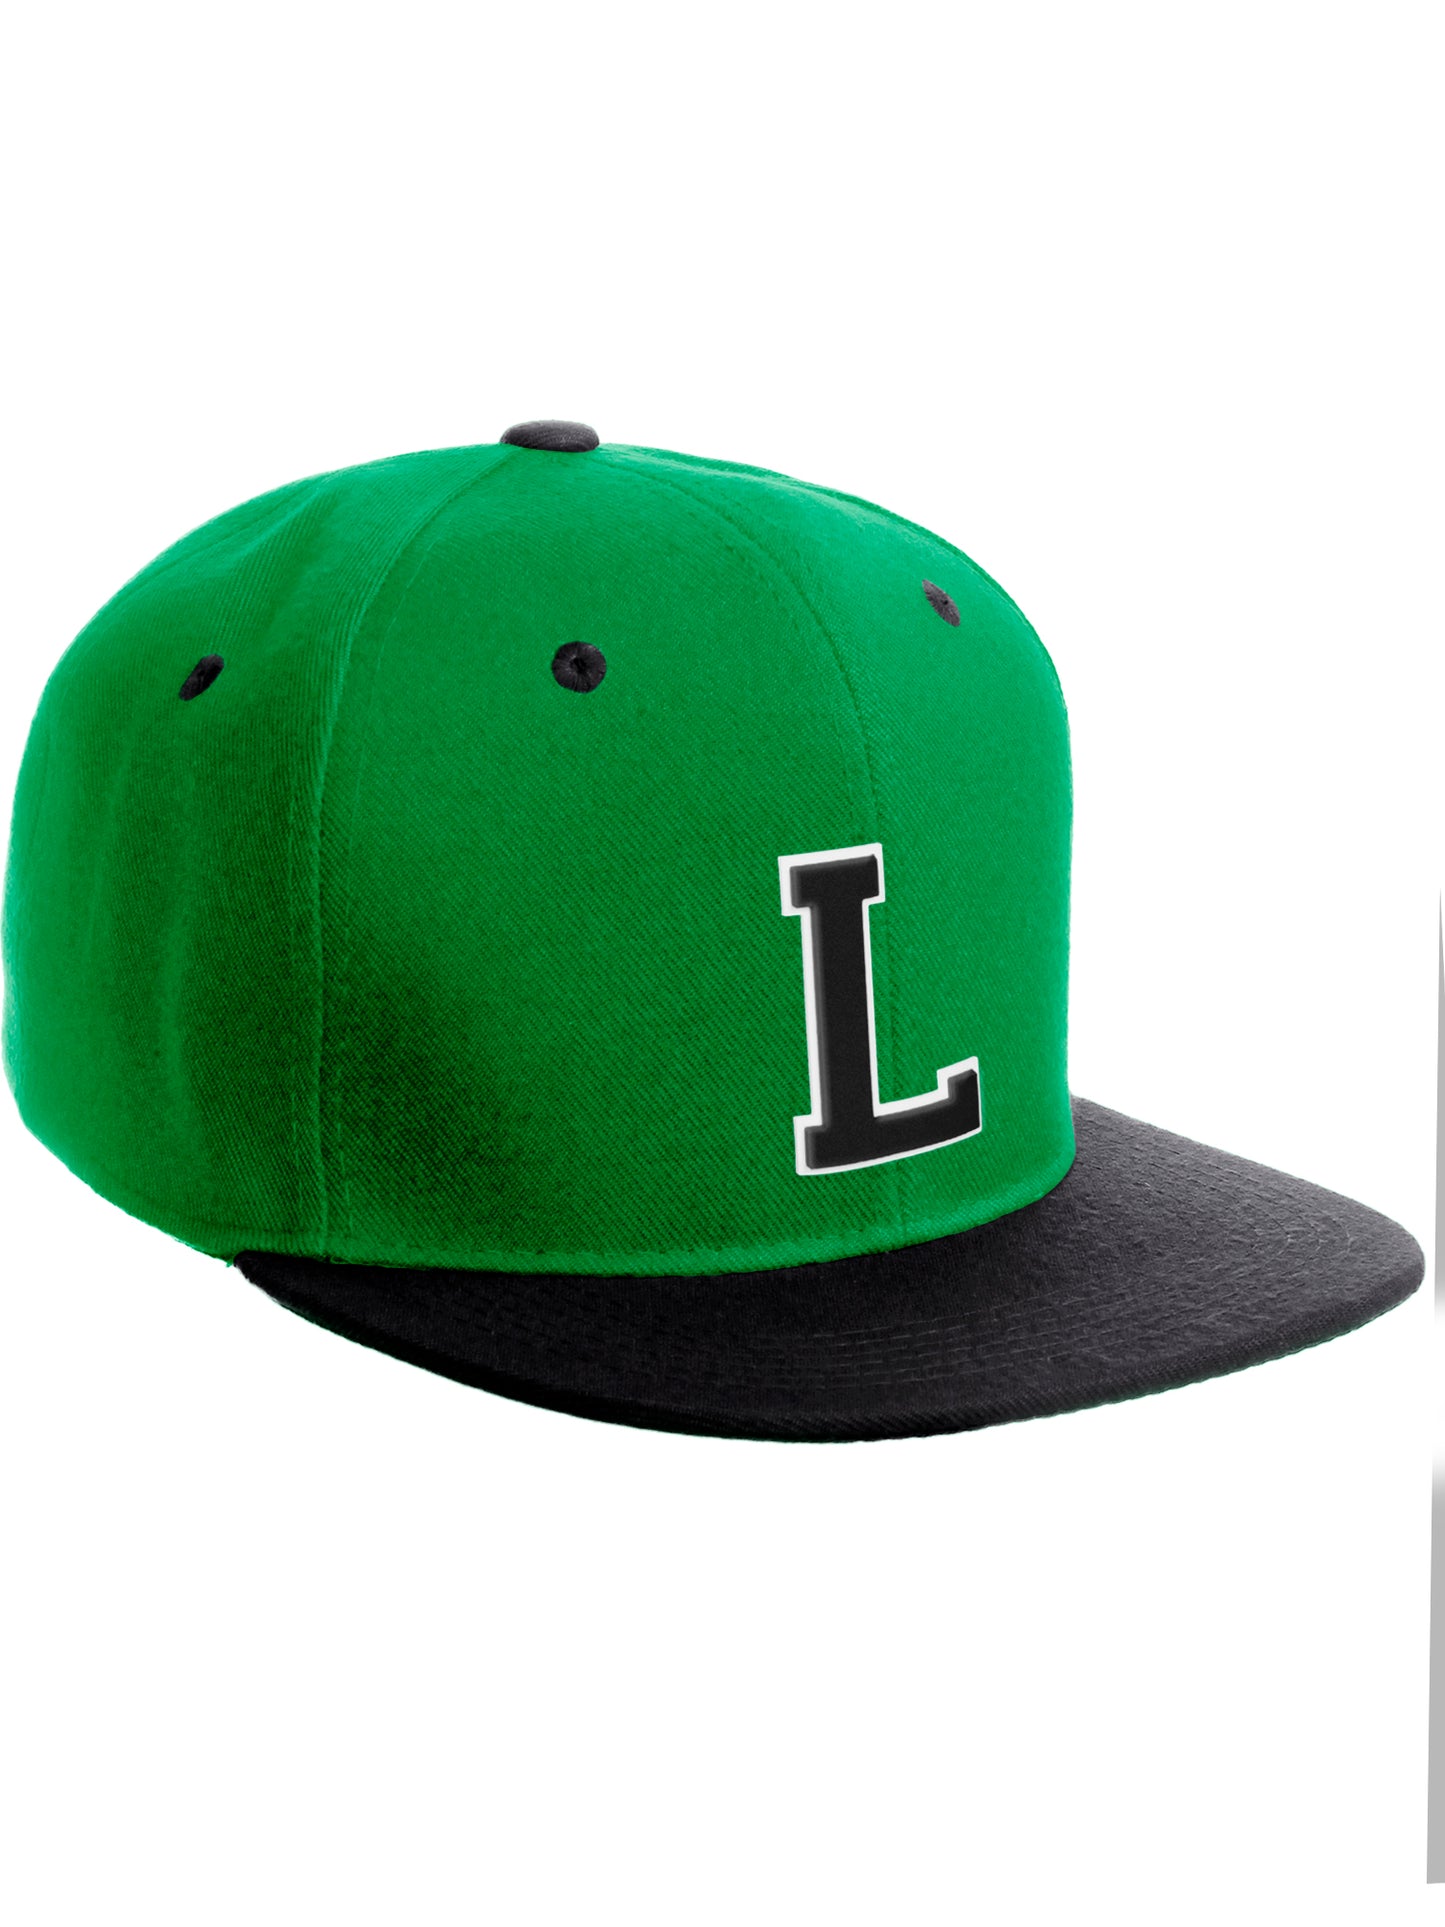 Classic Snapback Hat Custom A to Z Initial Letters, Green Black Cap White Black